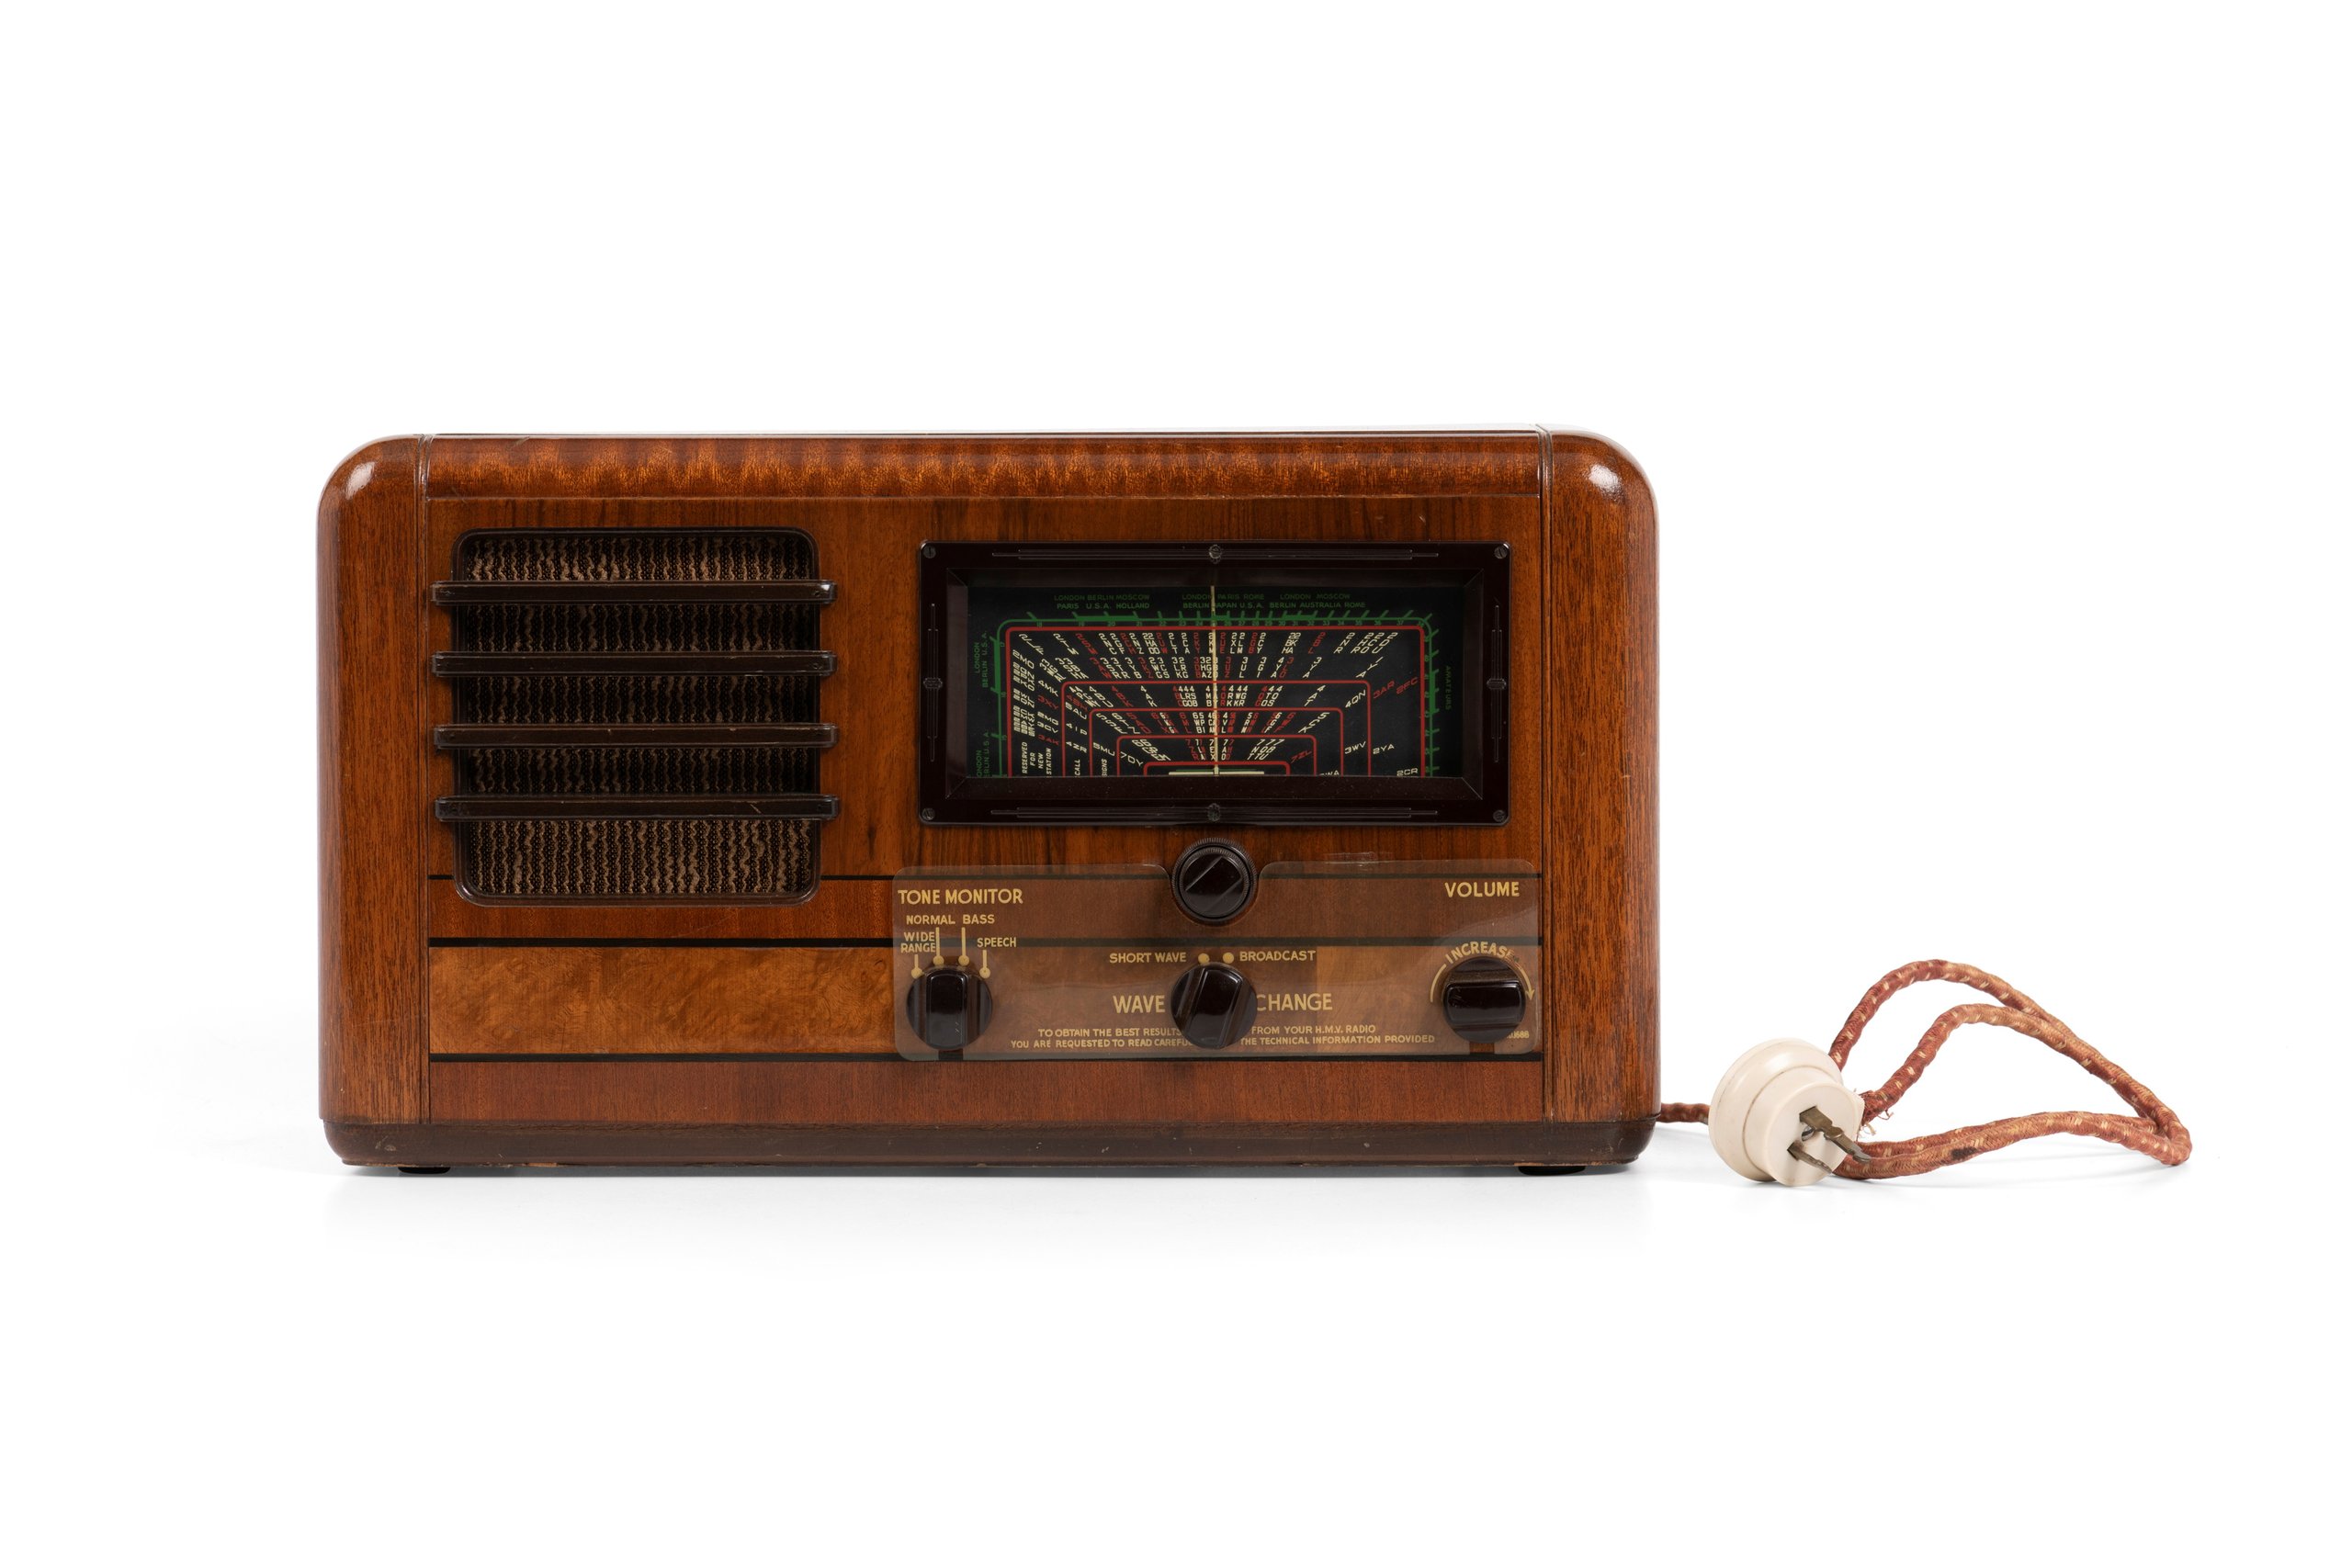 His Master's Voice radio receiver made by the Gramophone Company Ltd